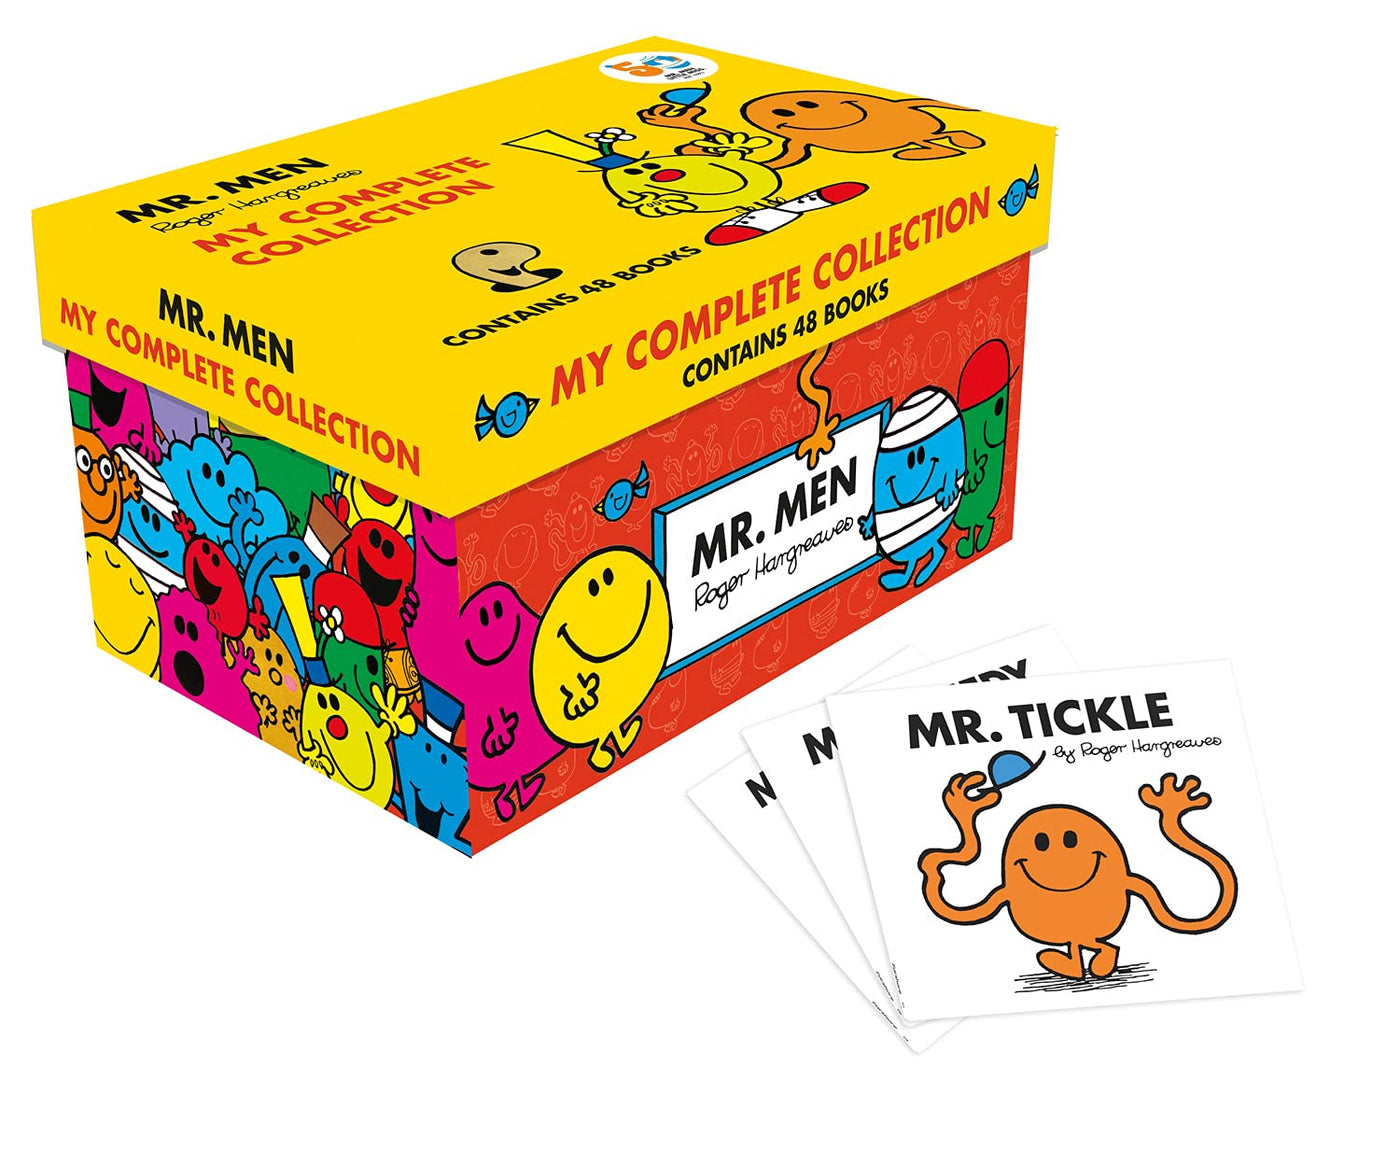 Mr.Men My Complete Collection Box Set | Roger Hargreaves